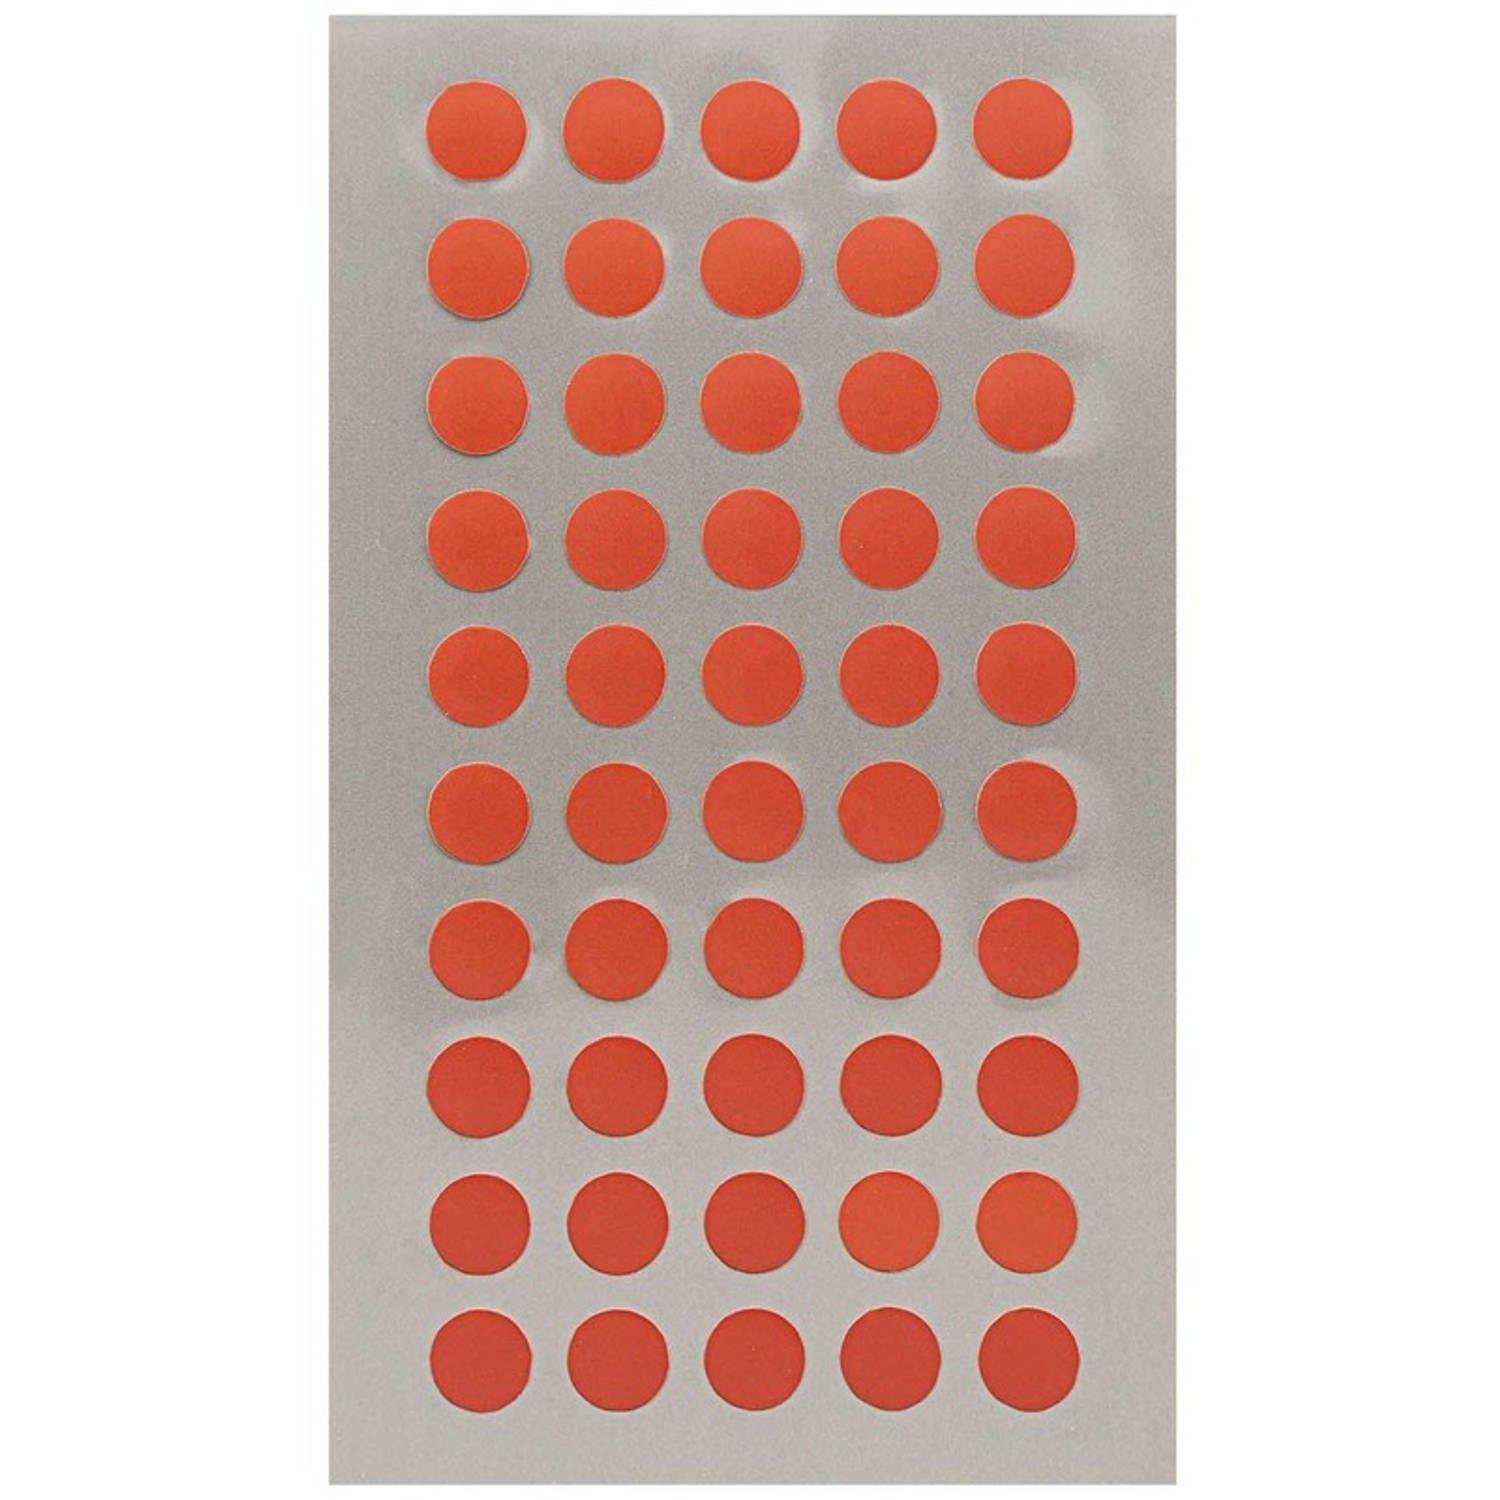 600x Stippen Stickers 8 Mm - Stickers - Rood